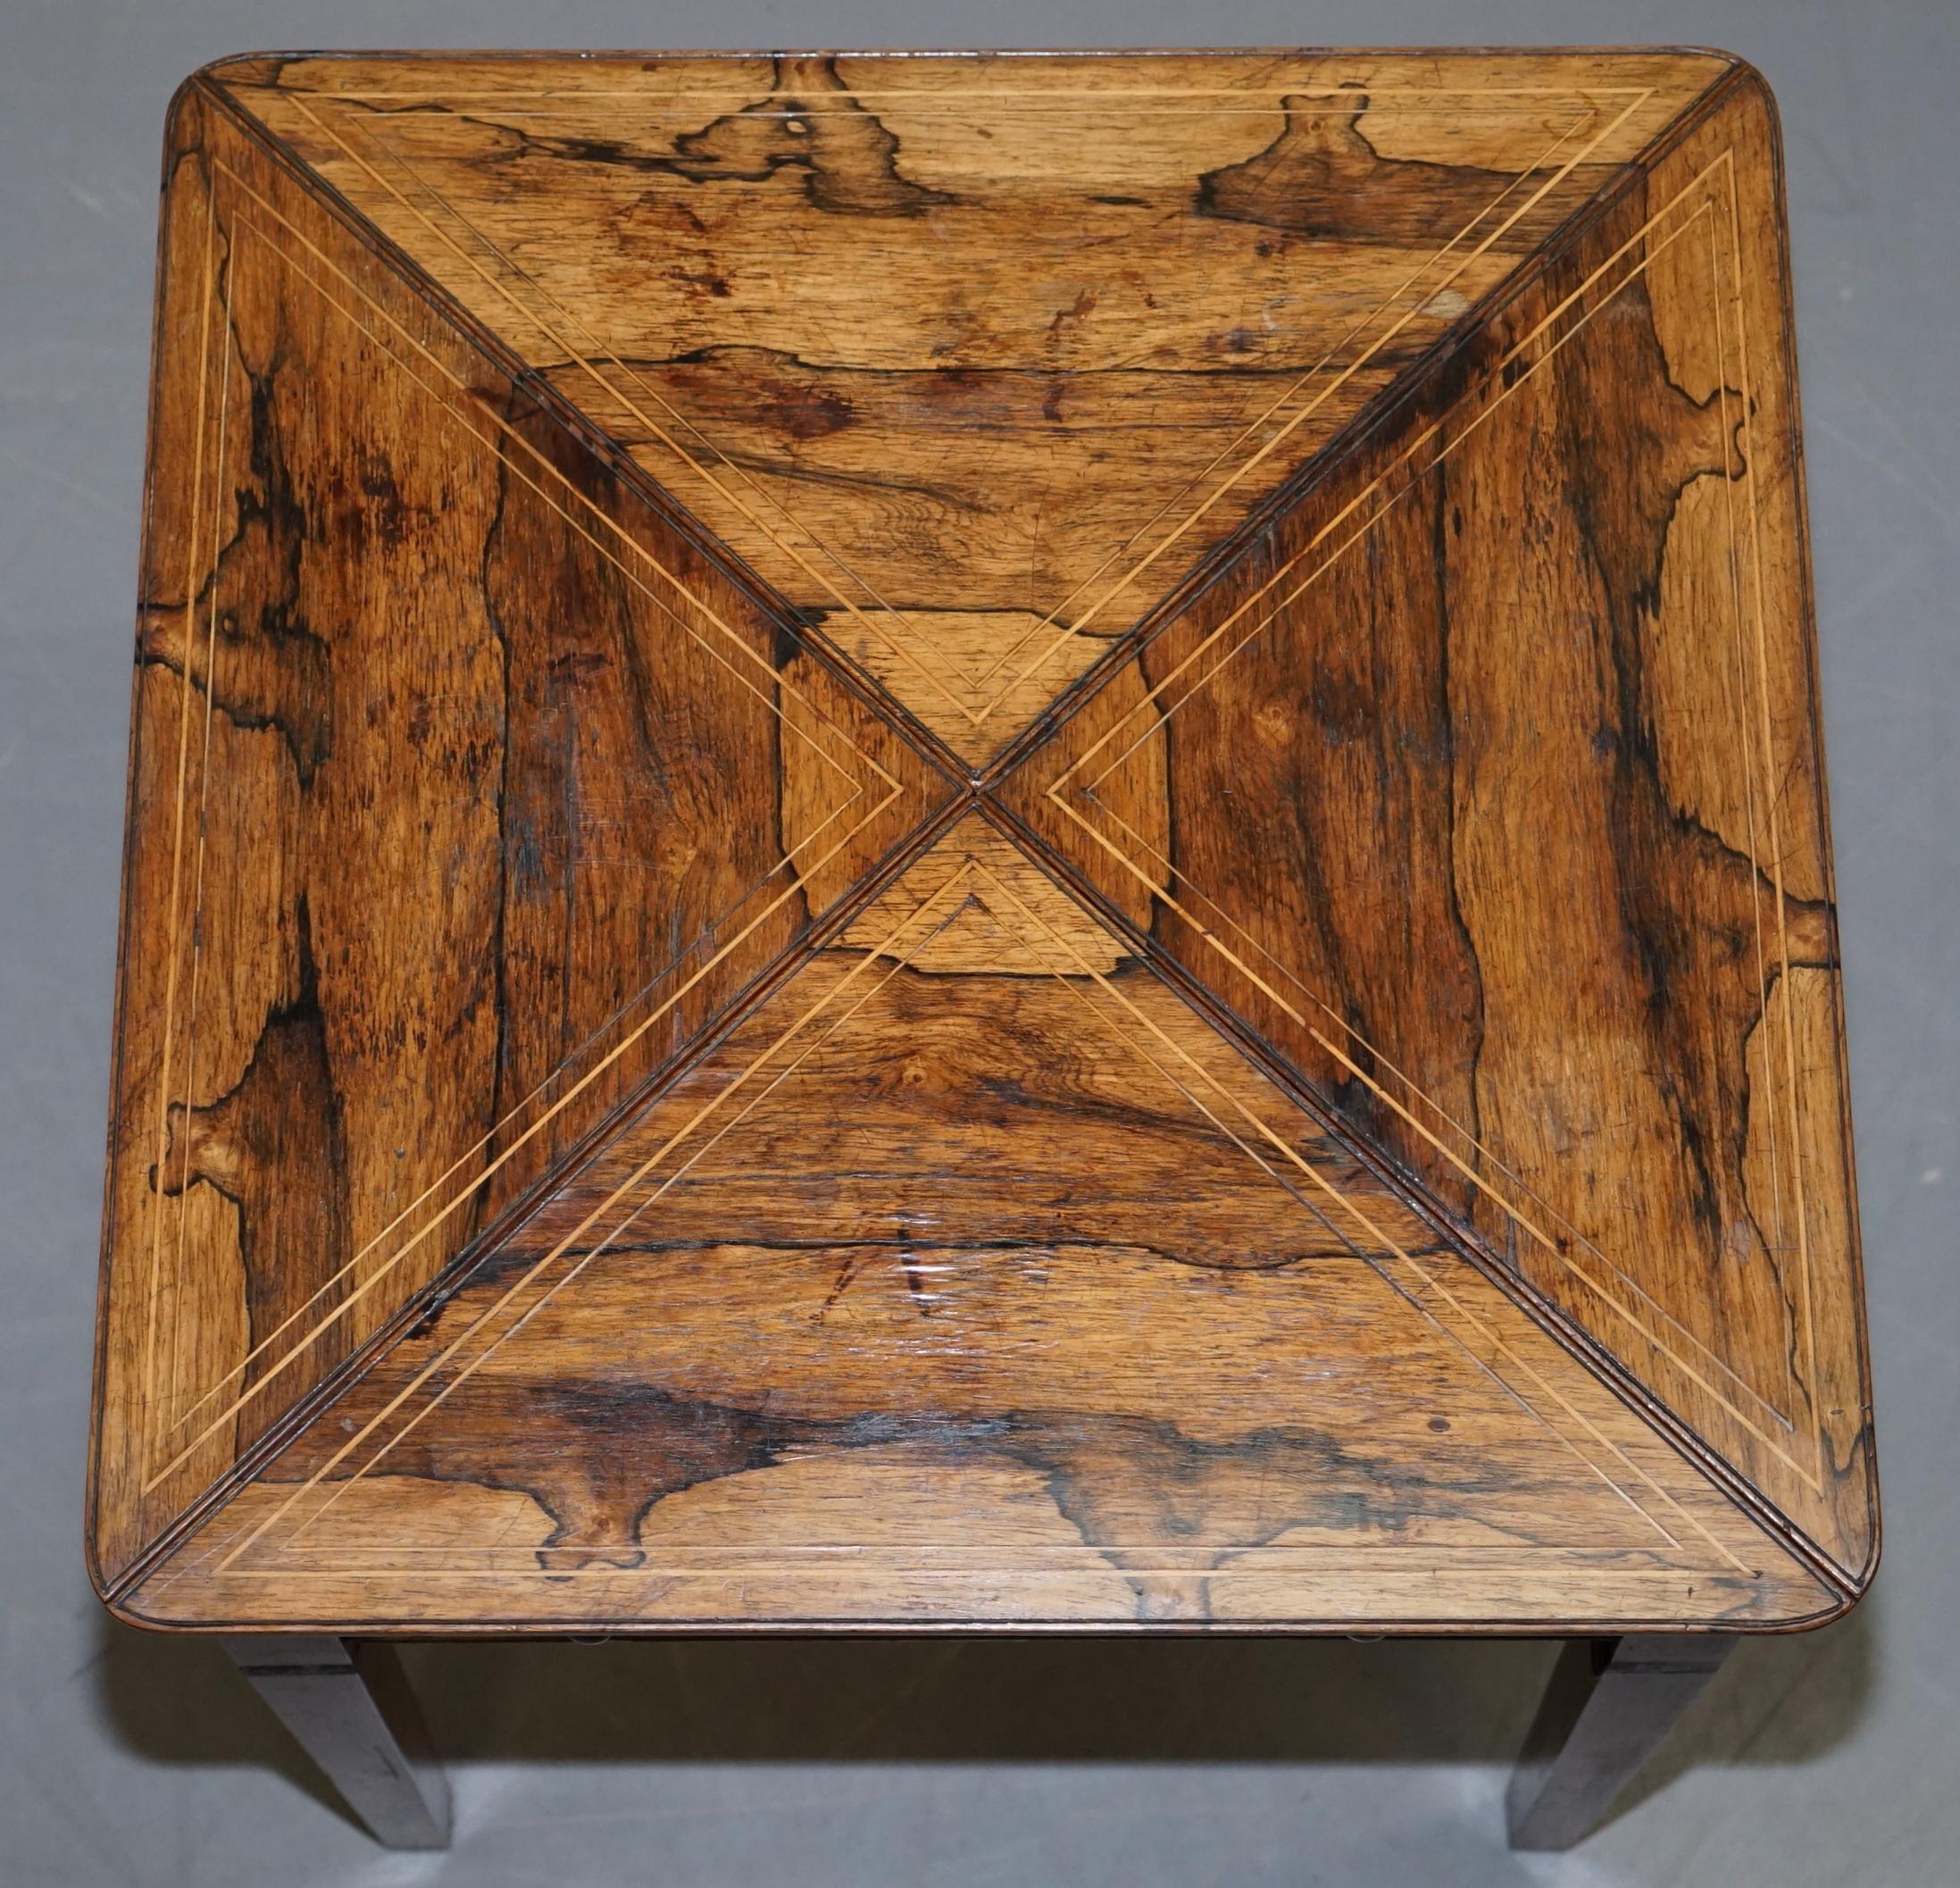 Hand-Crafted Victorian Mahogany Games Envelope Rare Wood Table circa 1880 Unfolds Extends